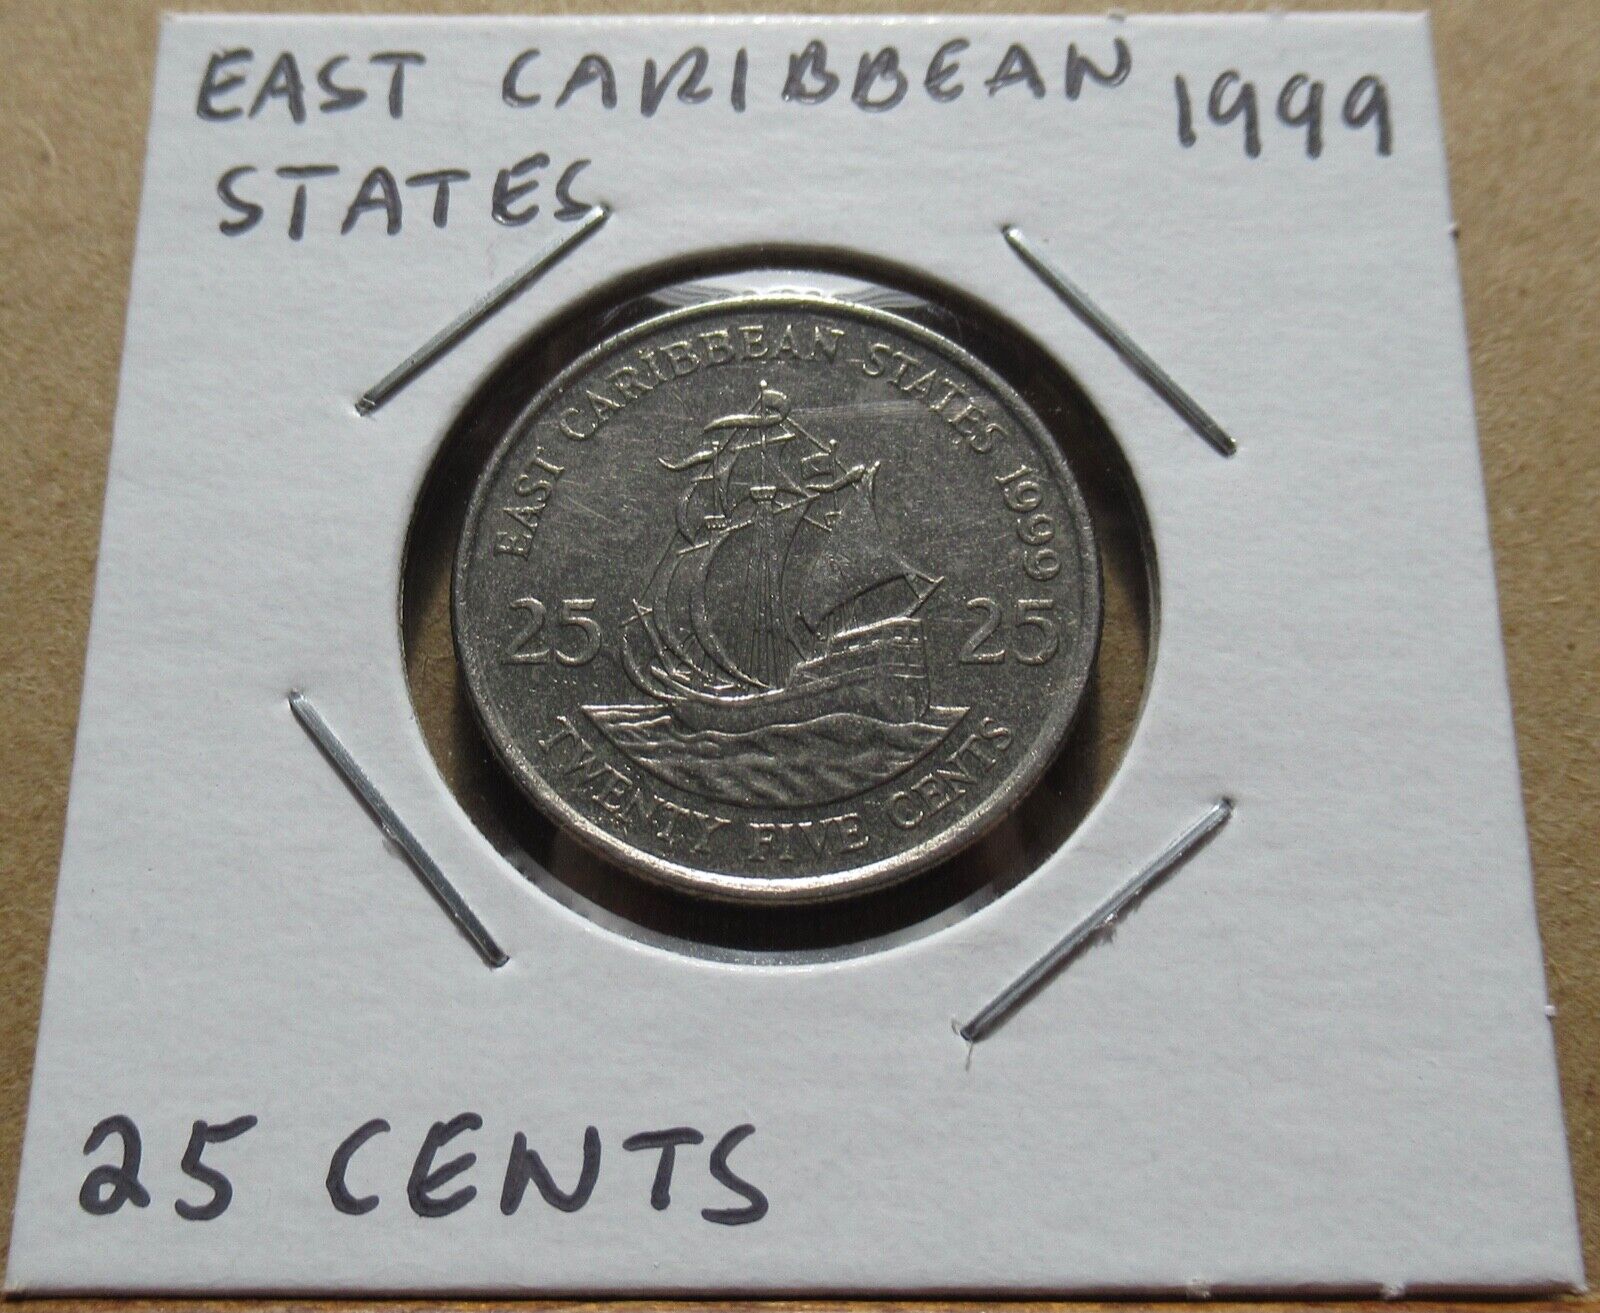 East Caribbean States 25 Cents 1999 - Coin in 2x2 Flip - B0618